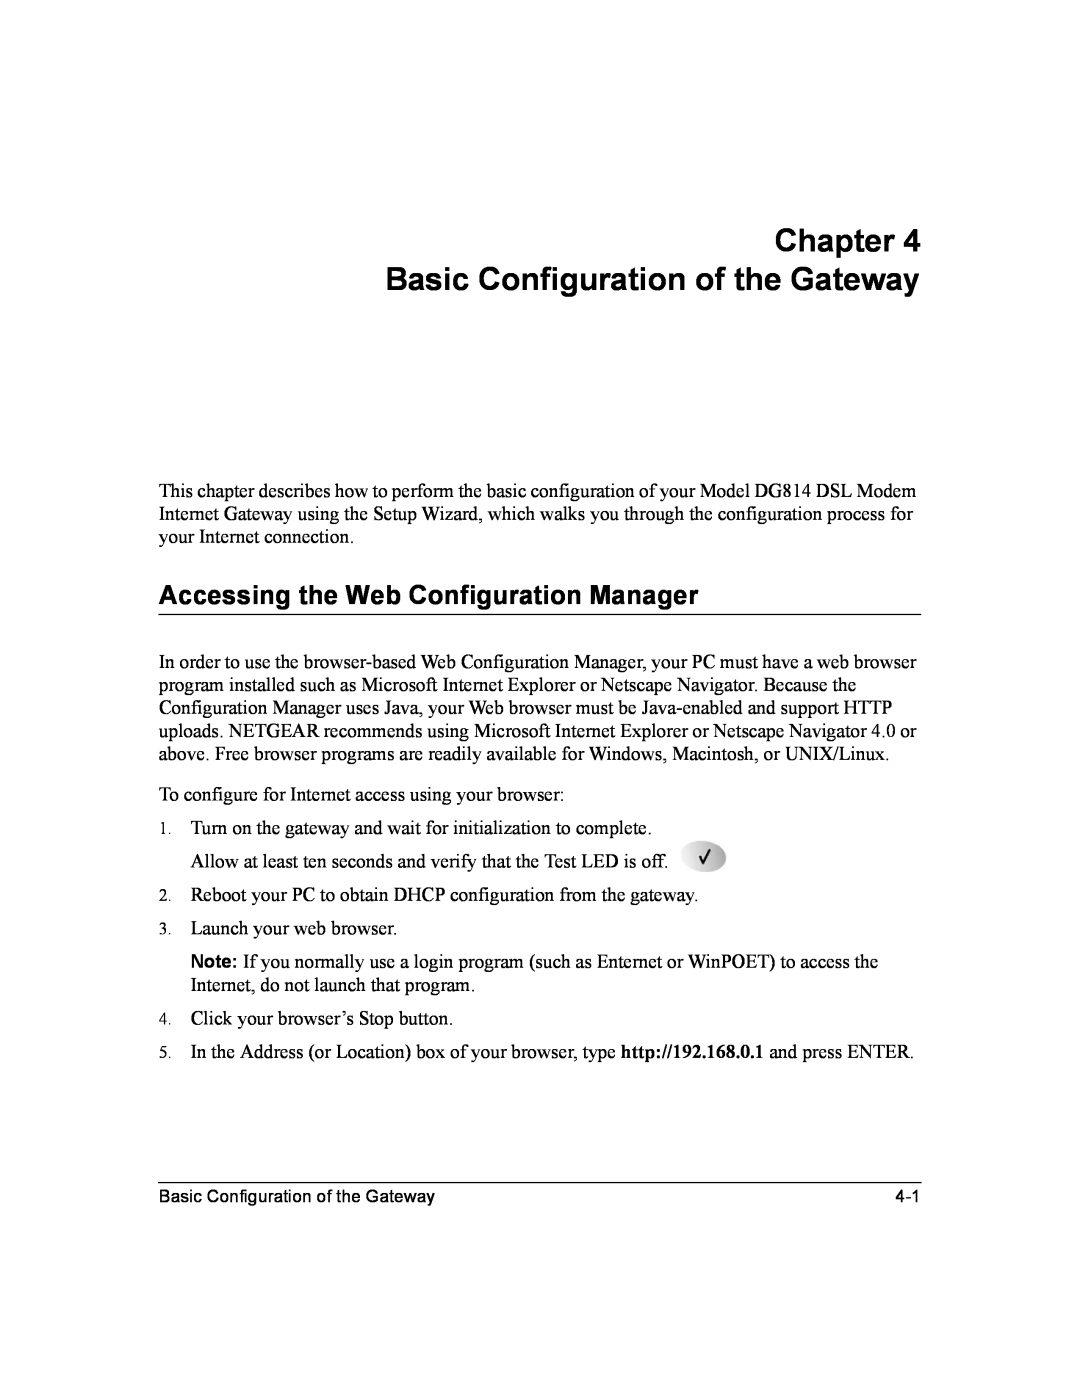 NETGEAR DG814 DSL manual Chapter Basic Configuration of the Gateway, Accessing the Web Configuration Manager 